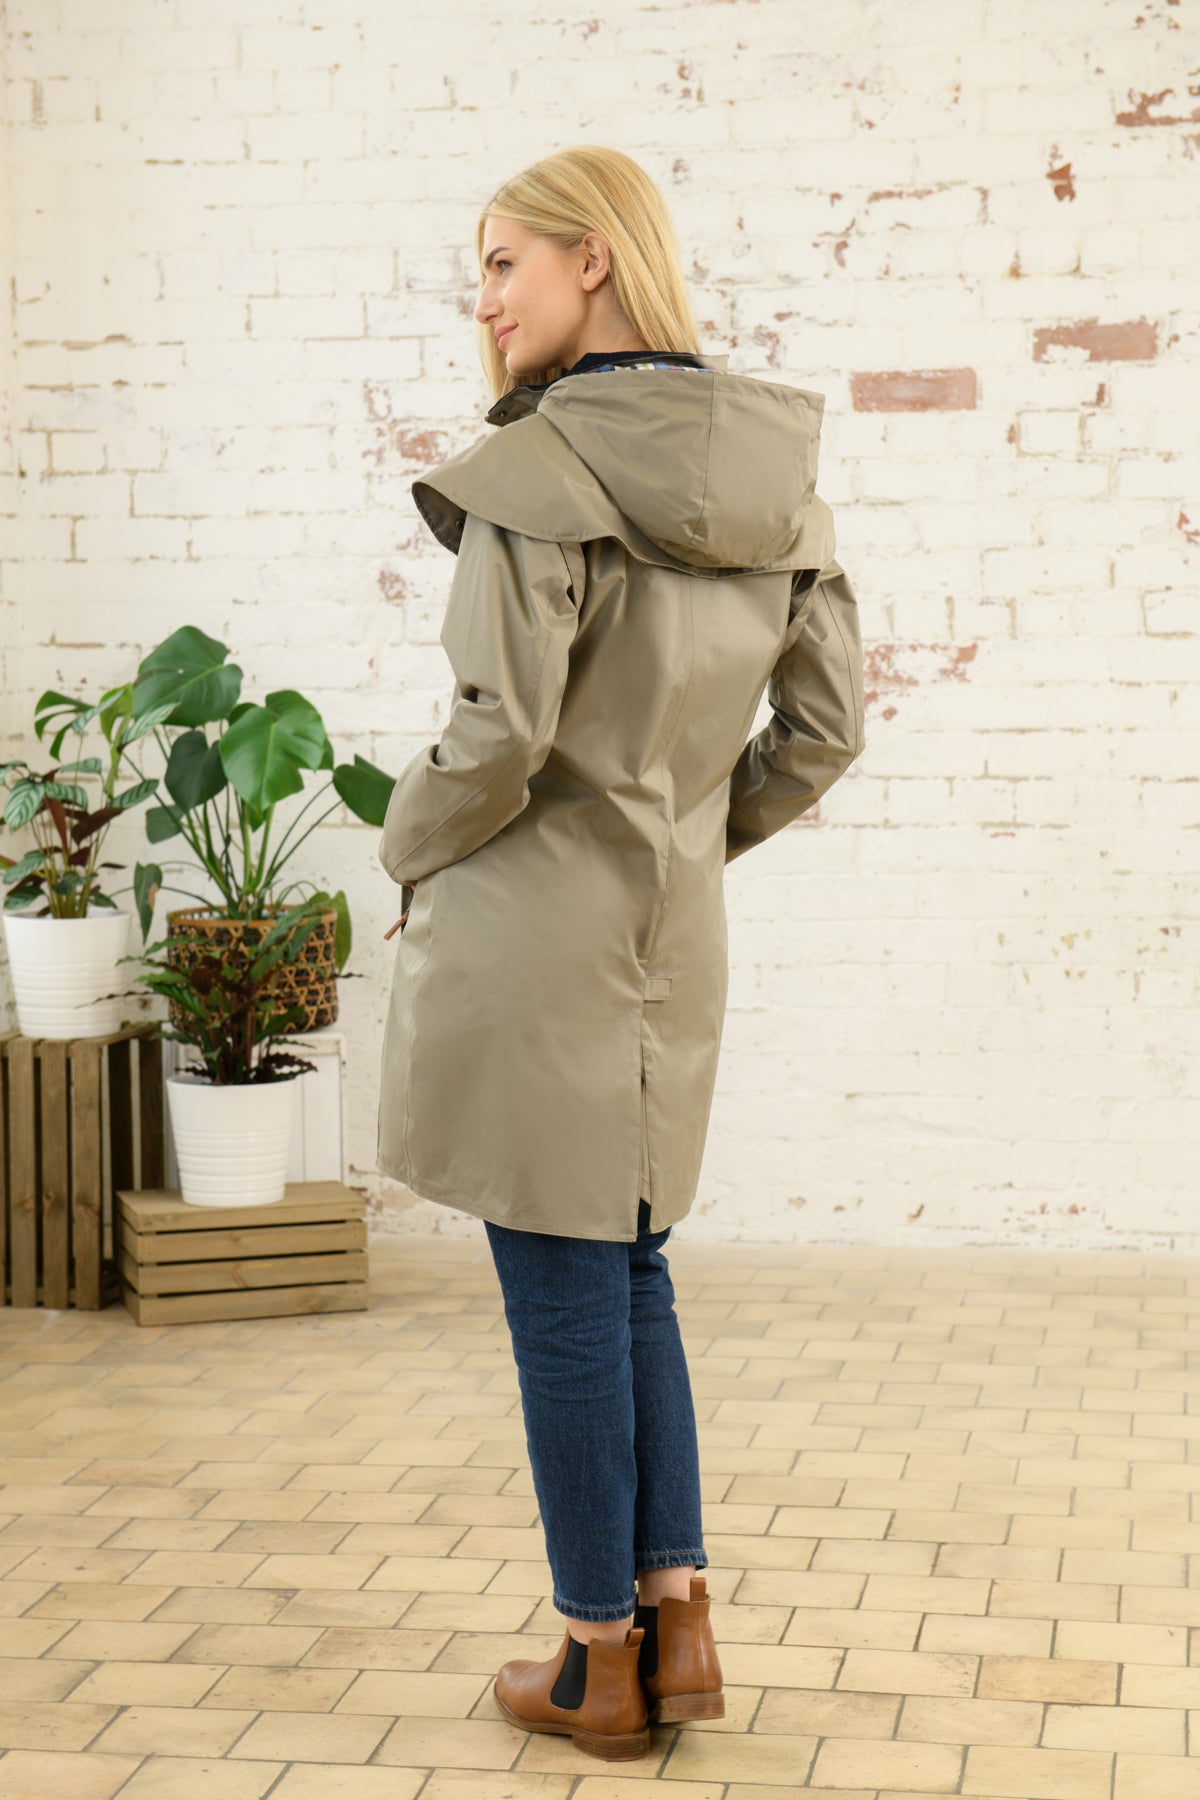 Outrider 3/4 Length Waterproof Raincoat - Fawn